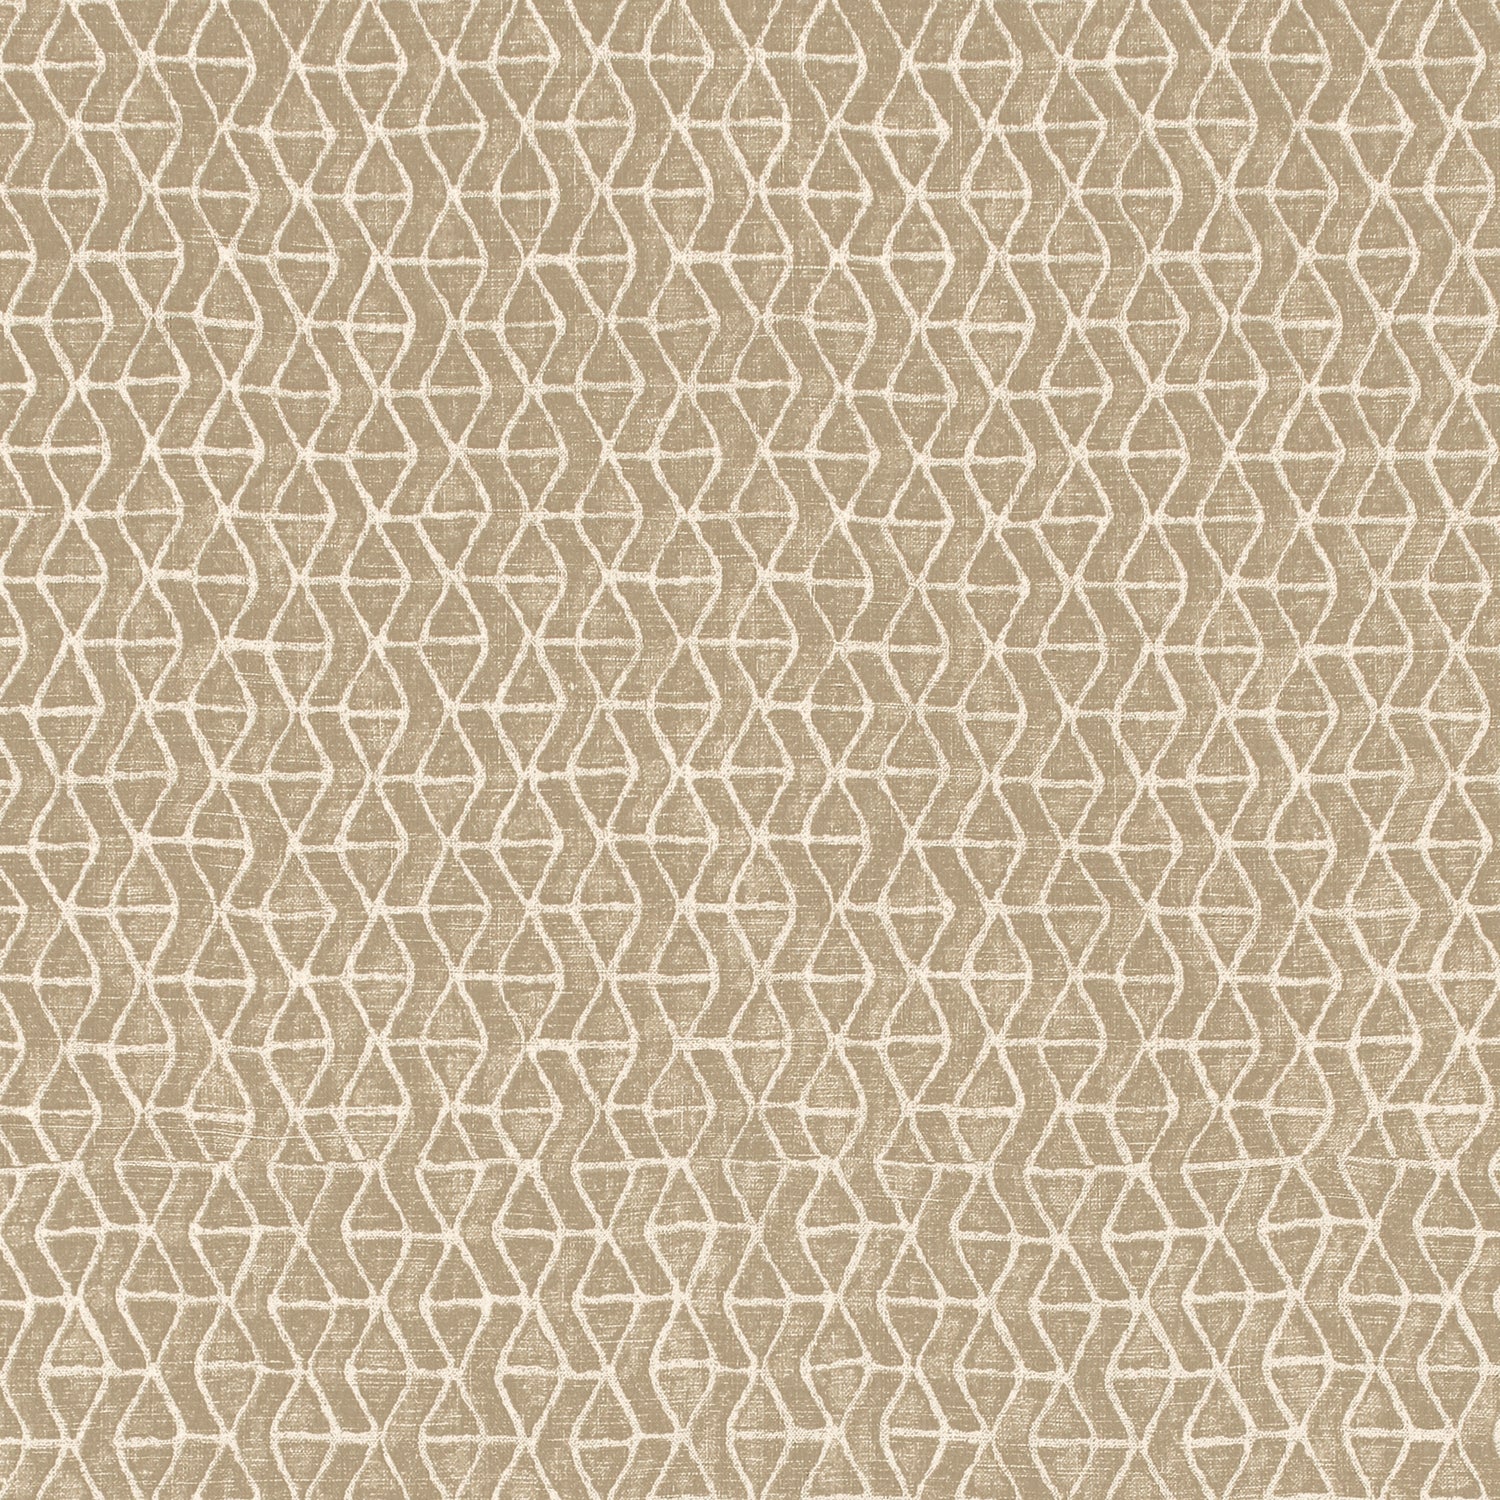 Stony Brook fabric in beige color - pattern number F942003 - by Thibaut in the Sojourn collection